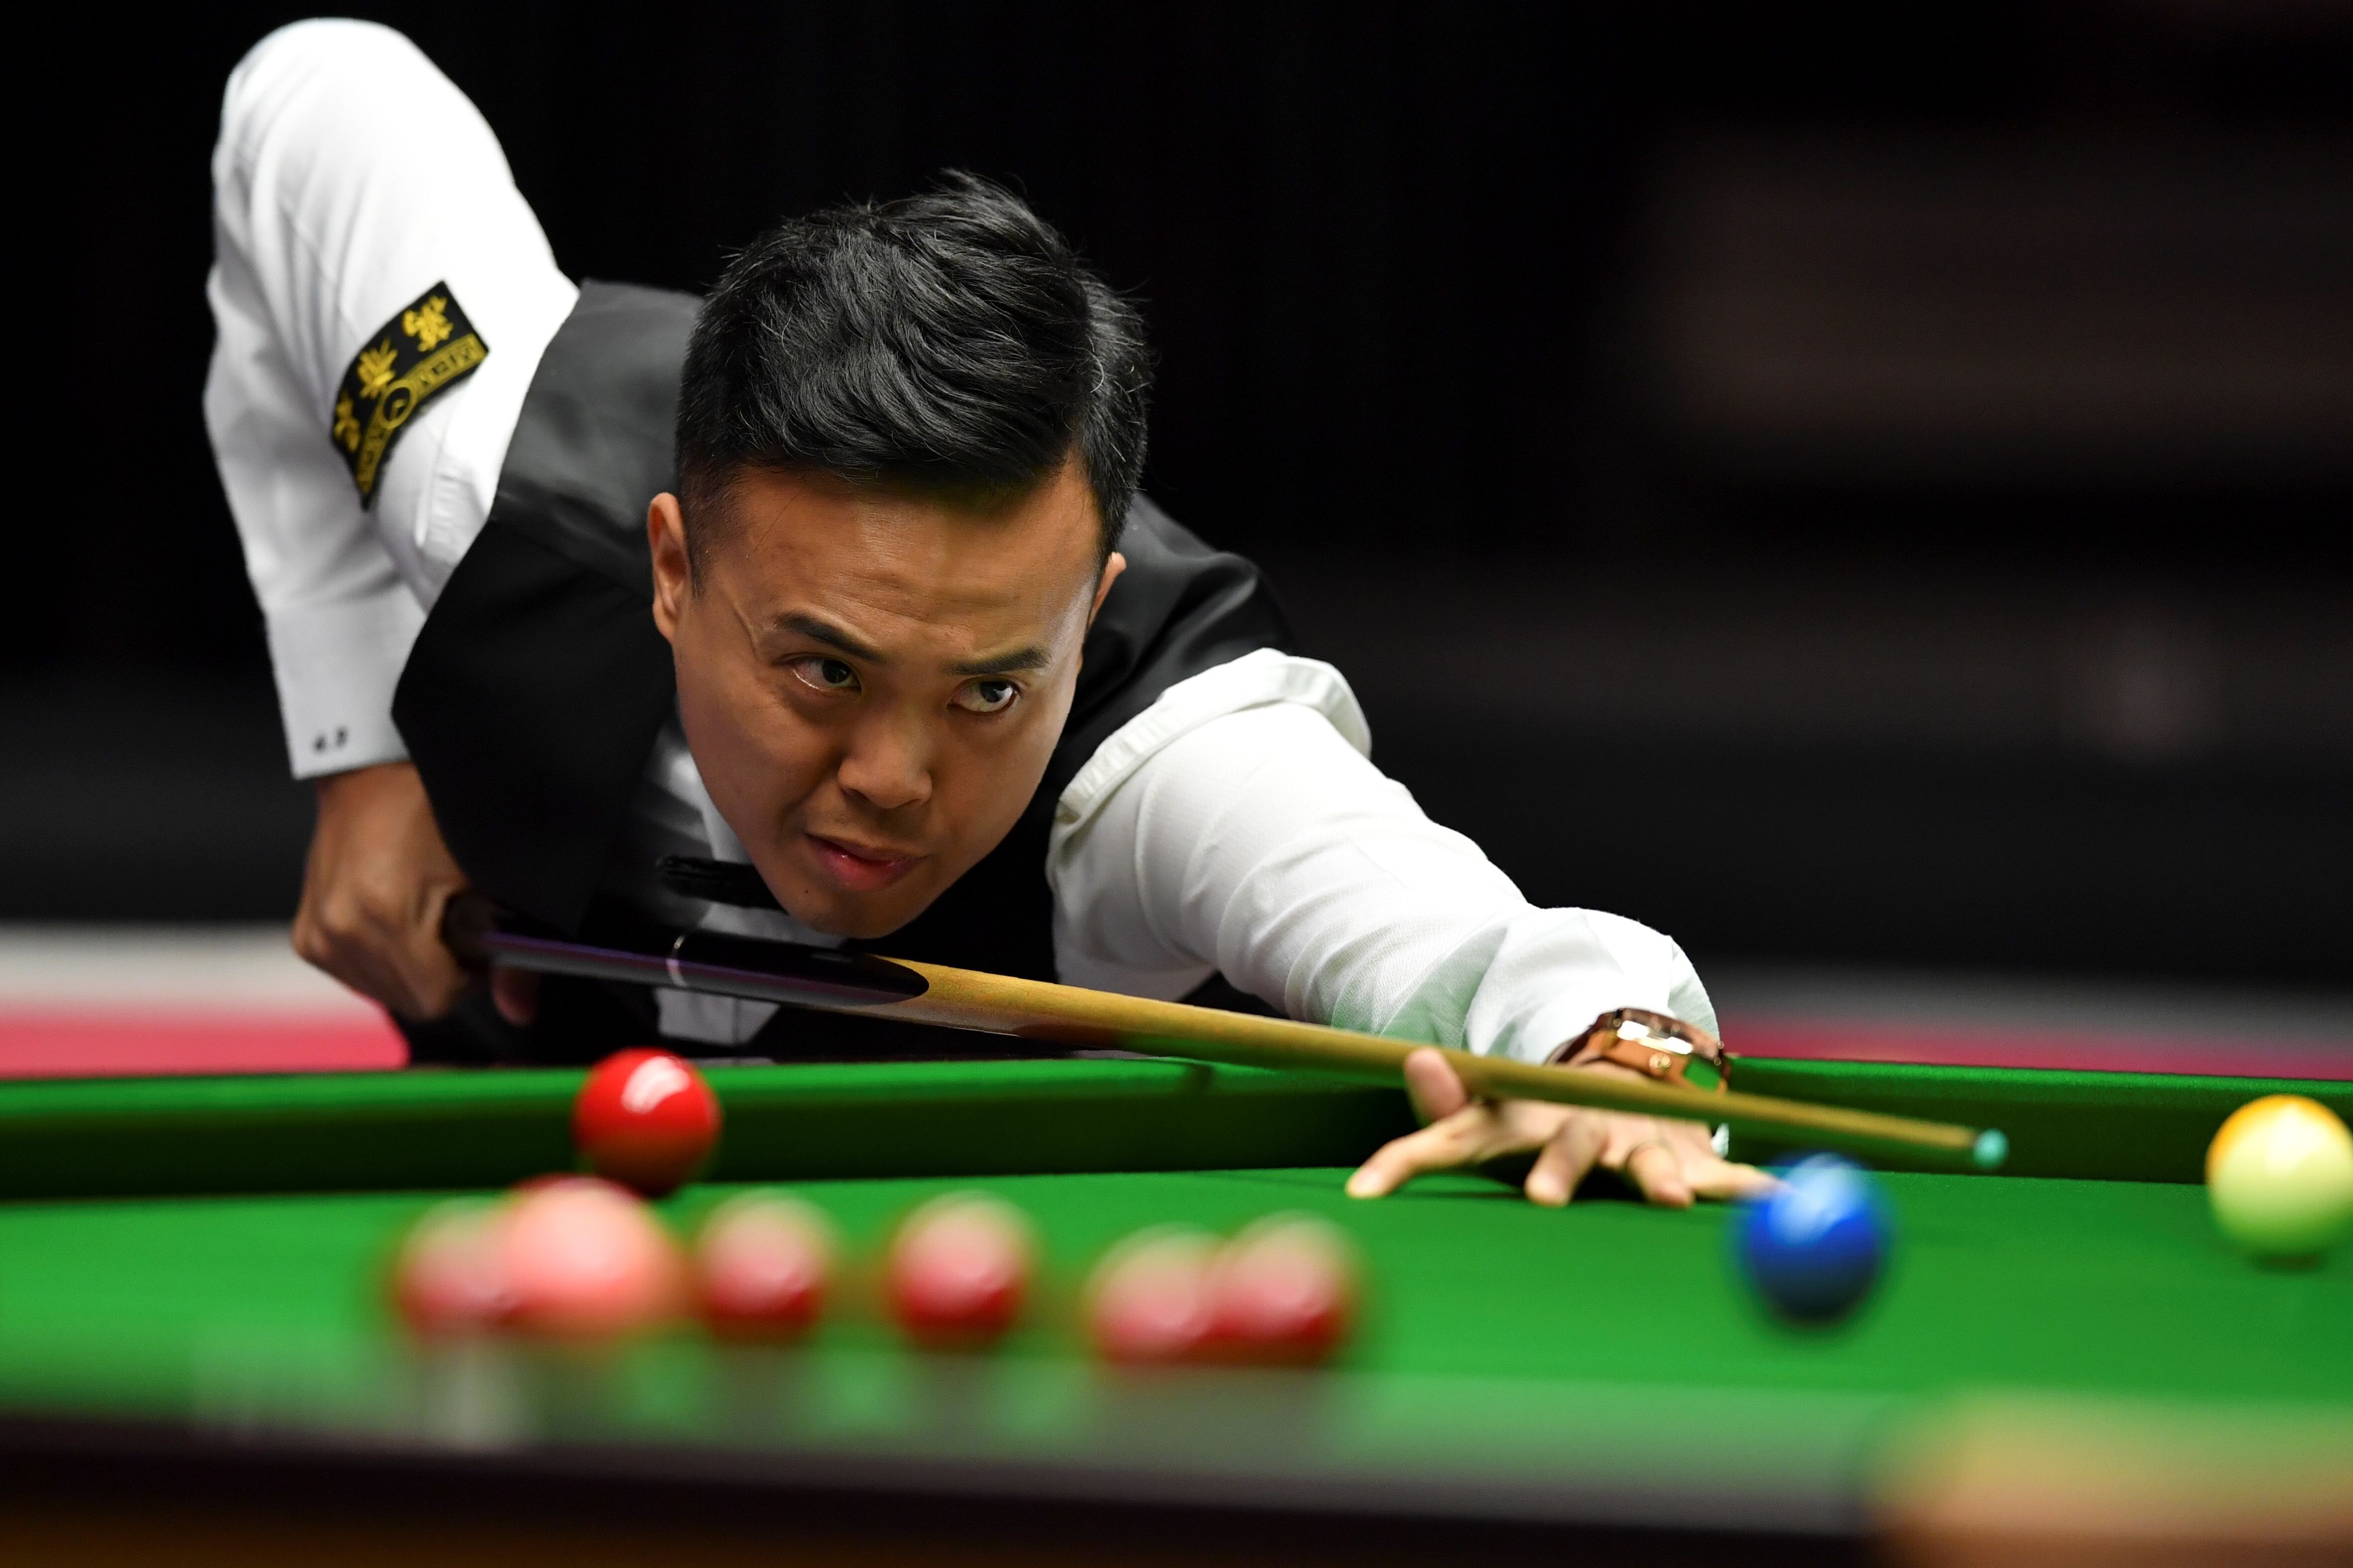 Hong Kong’s top-ranked player Marco Fu has not practised for three months after club establishments were closed due to pandemic control measures. Photo: AFP